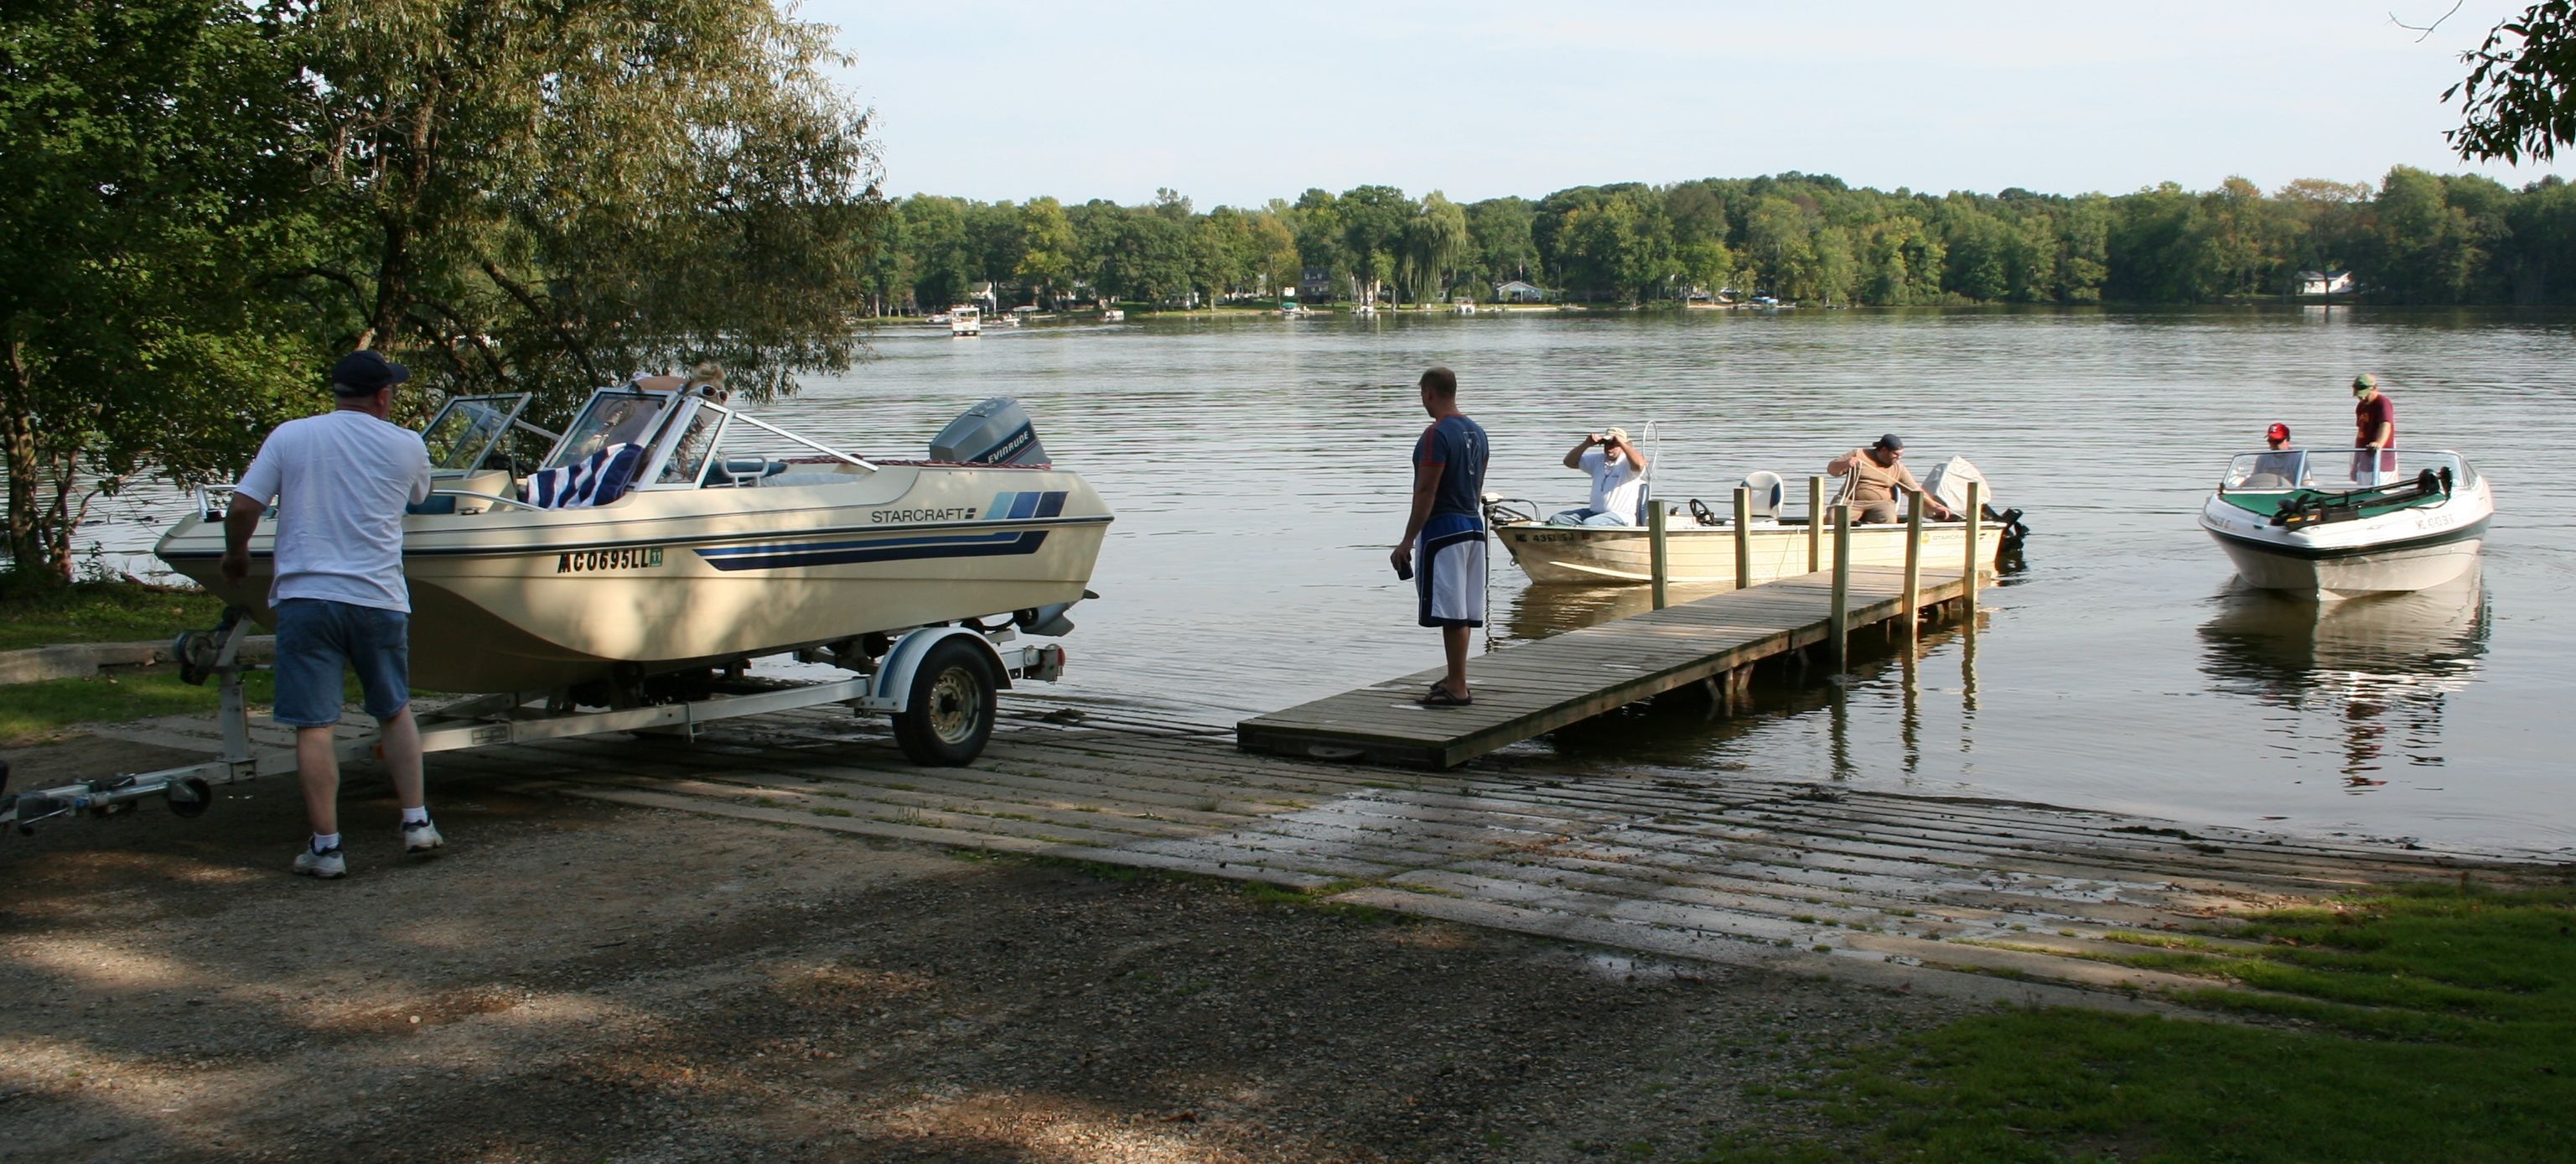 Public boat launch with two boats at the dock. 